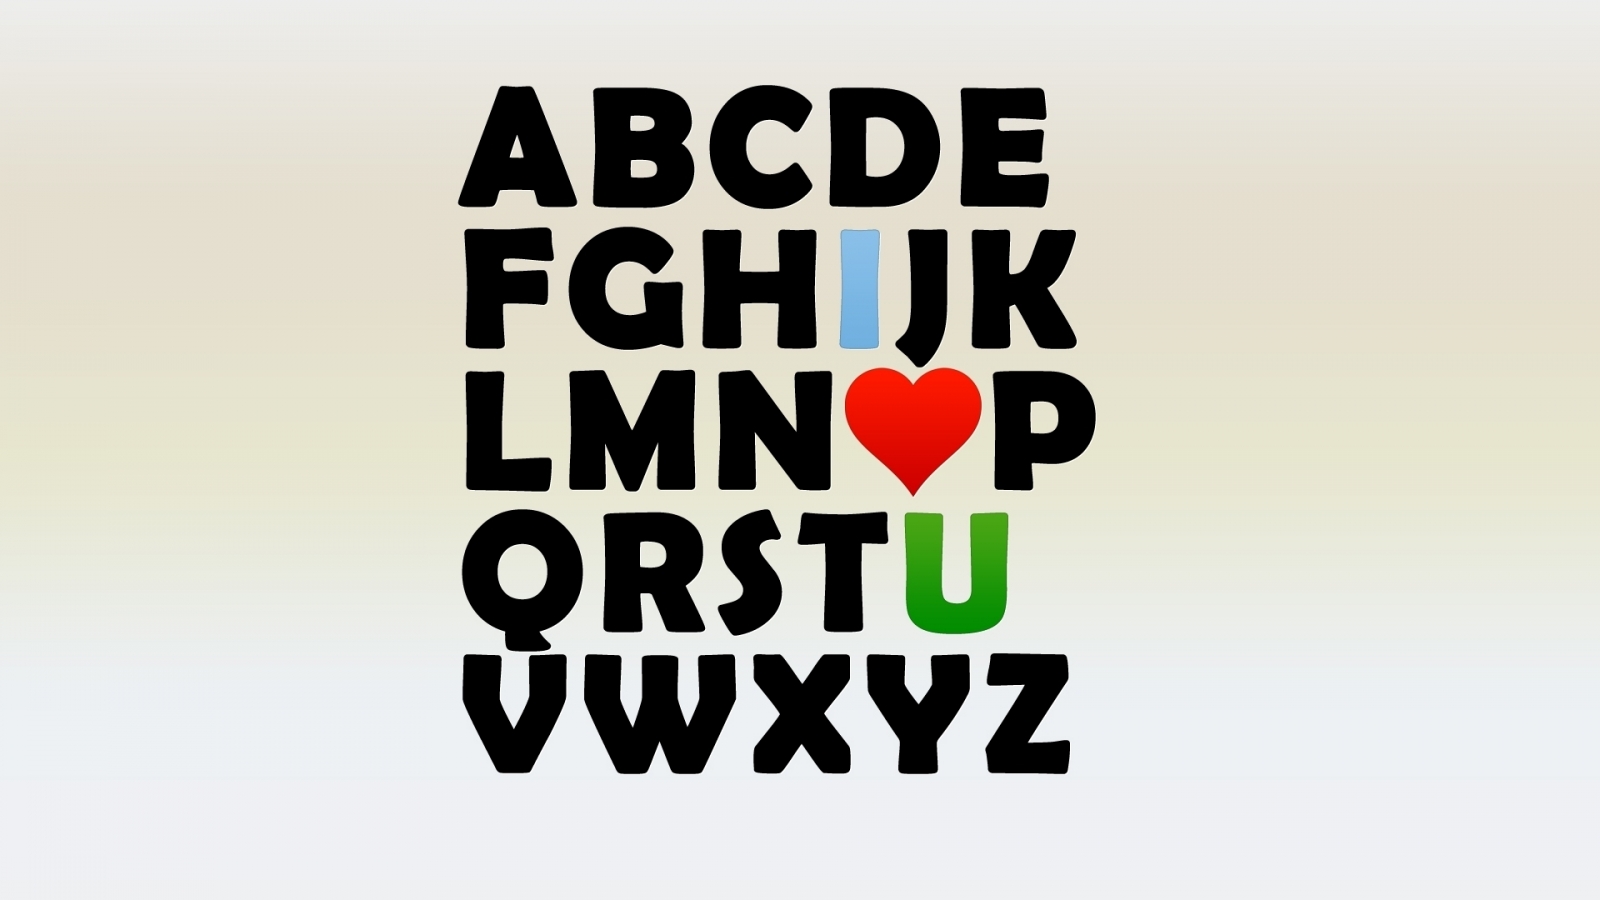 Alphabet Letters Wallpaper   HQ Free Wallpapers download 100 high